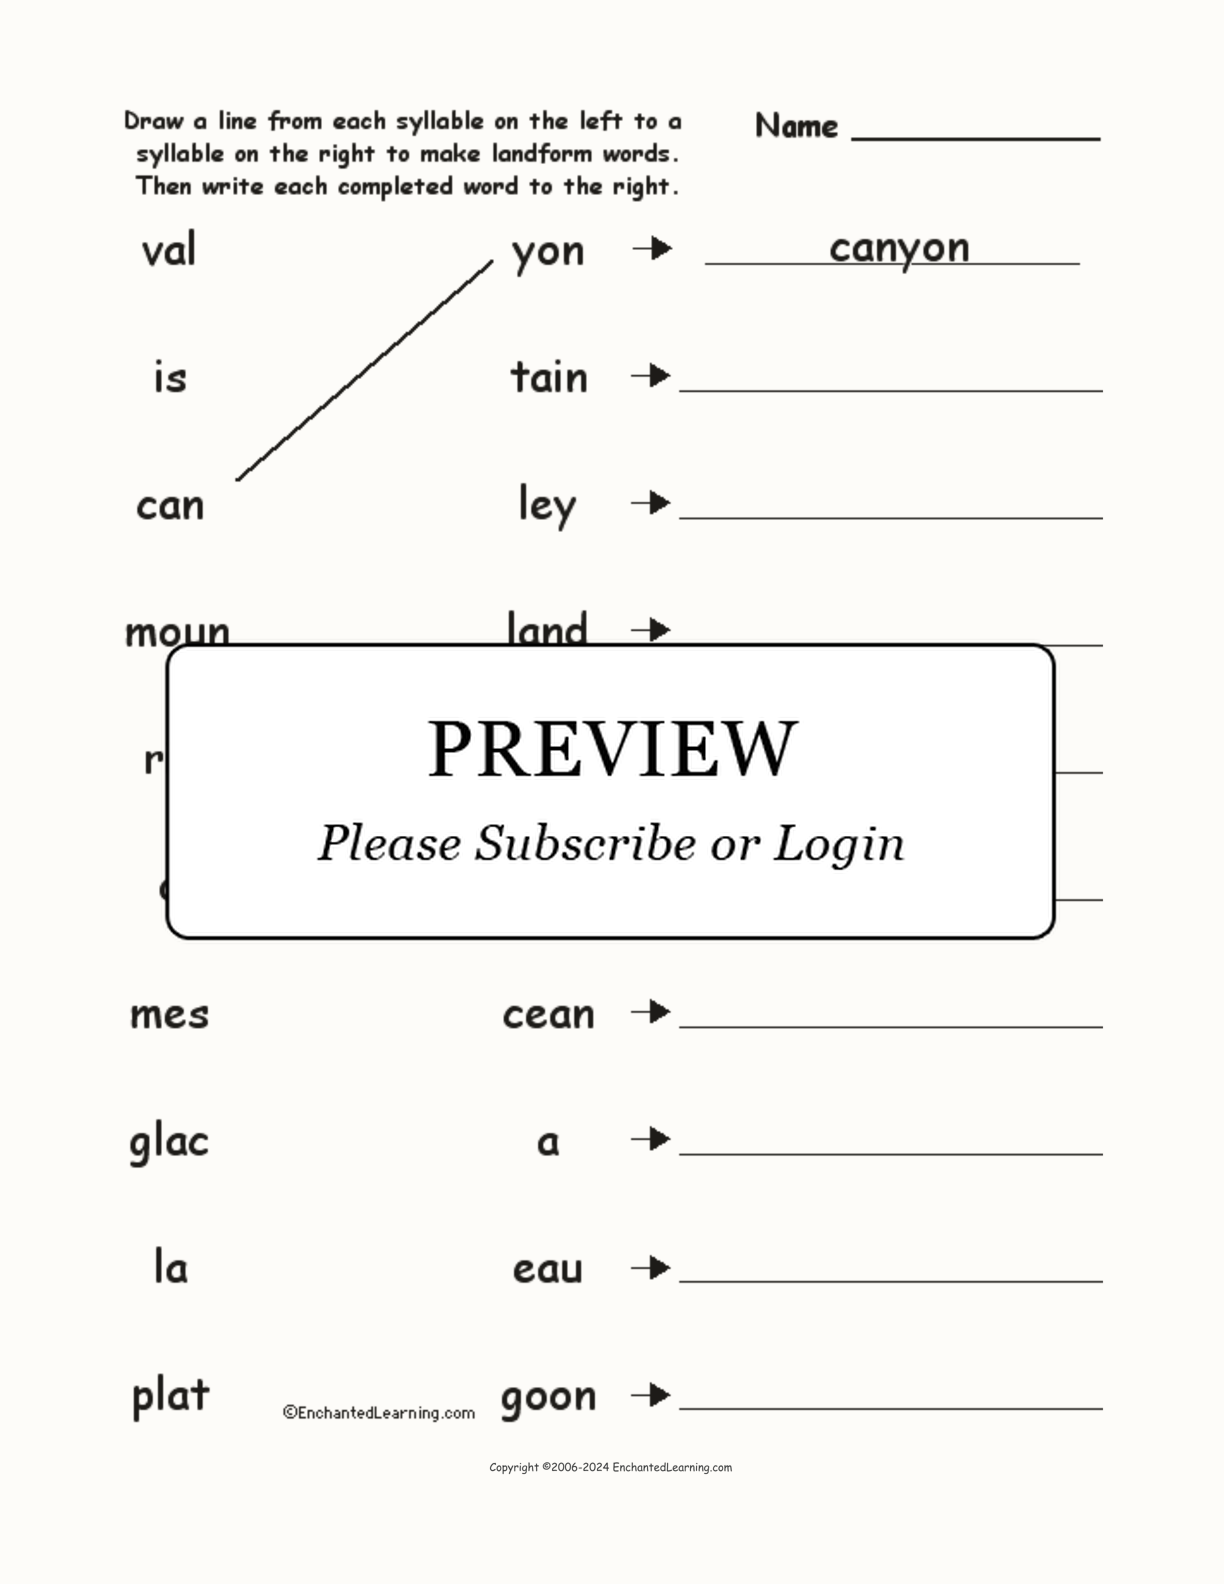 Match the Syllables: Landform Words interactive worksheet page 1